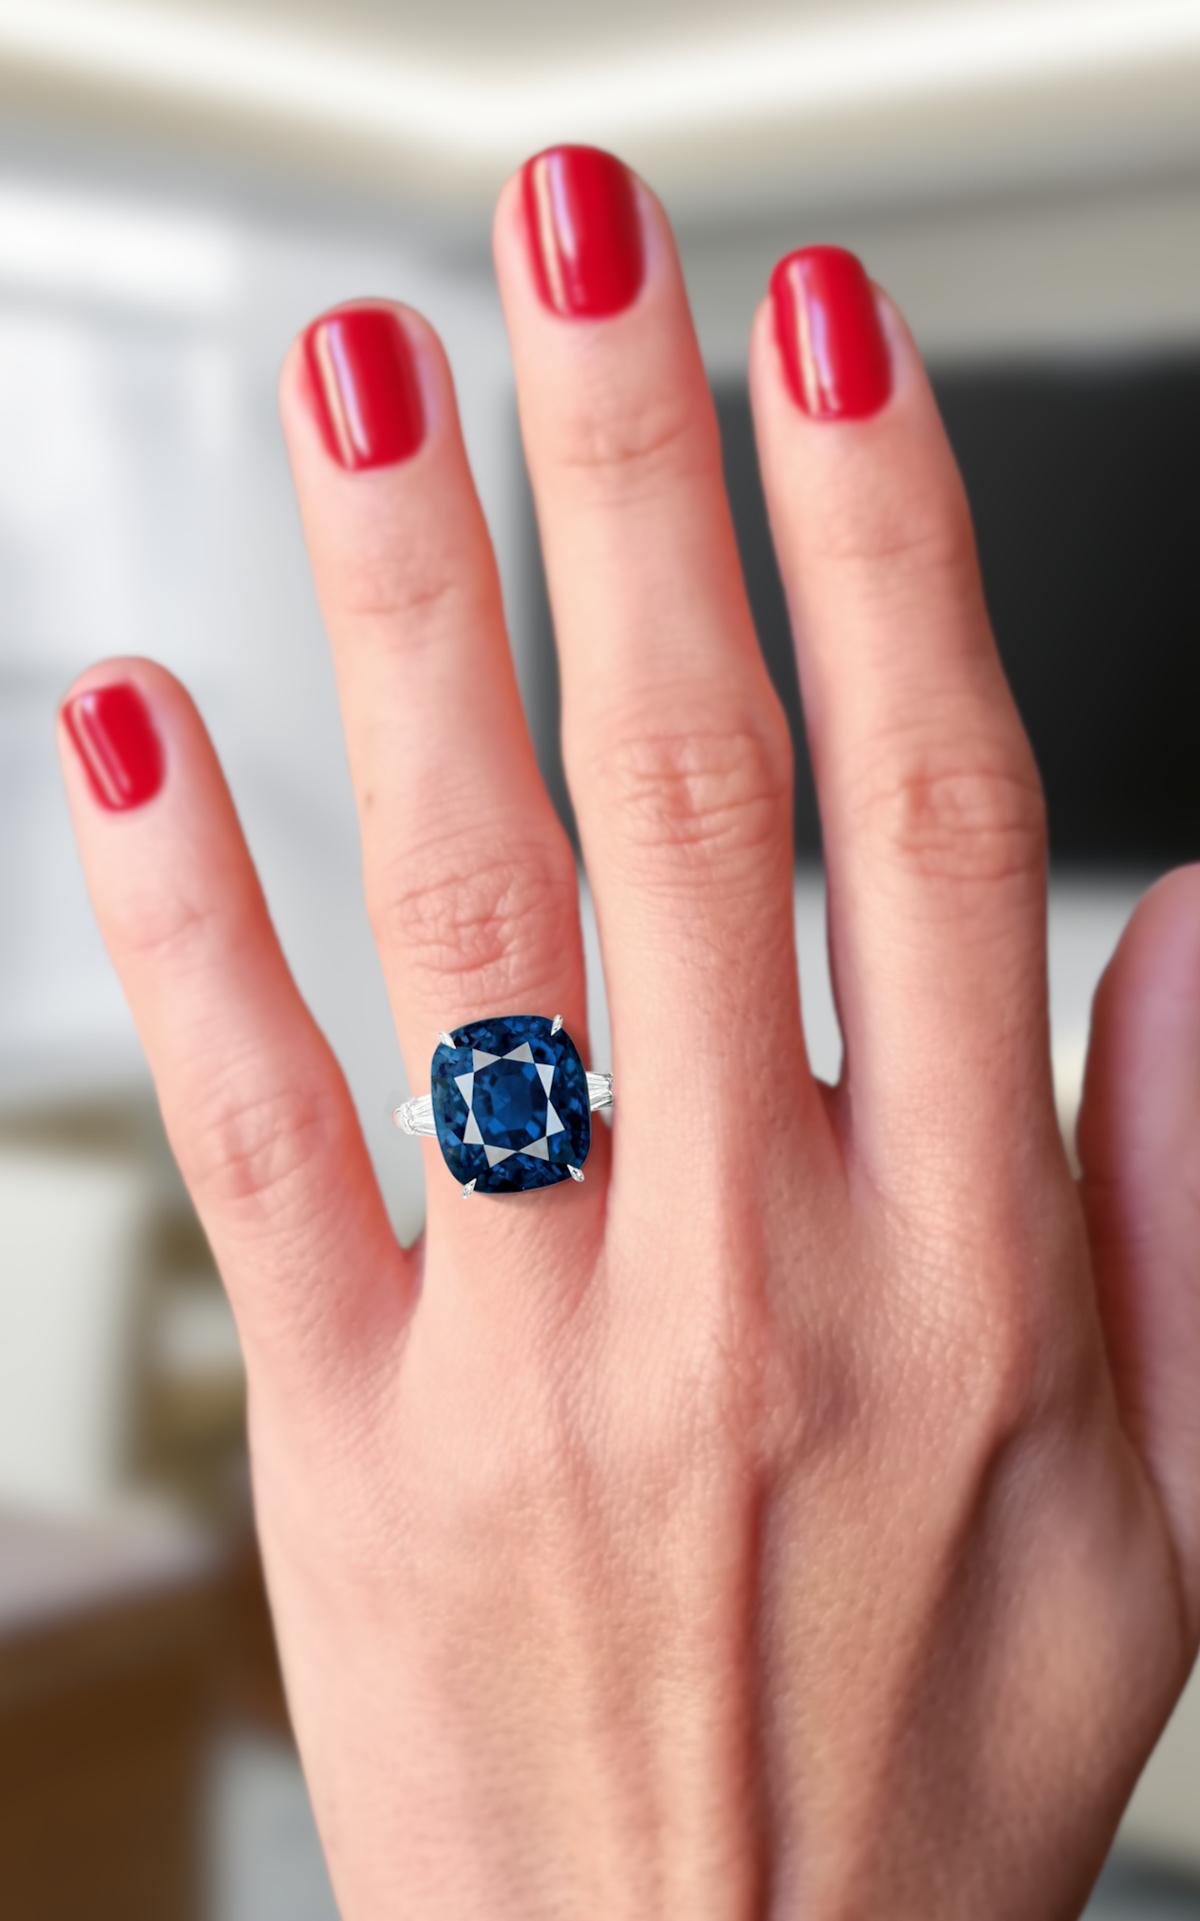 GRS SWITZERLAND Certified 11.80 Carat Sri-Lanka Cushion Cut Blue Sapphire Ring 

the main stone is quite large and is vs2 clarity
the sapphire has an extremely magnetic color!

the side diamonds are very pure approx. 0.75 carats in total and clarity